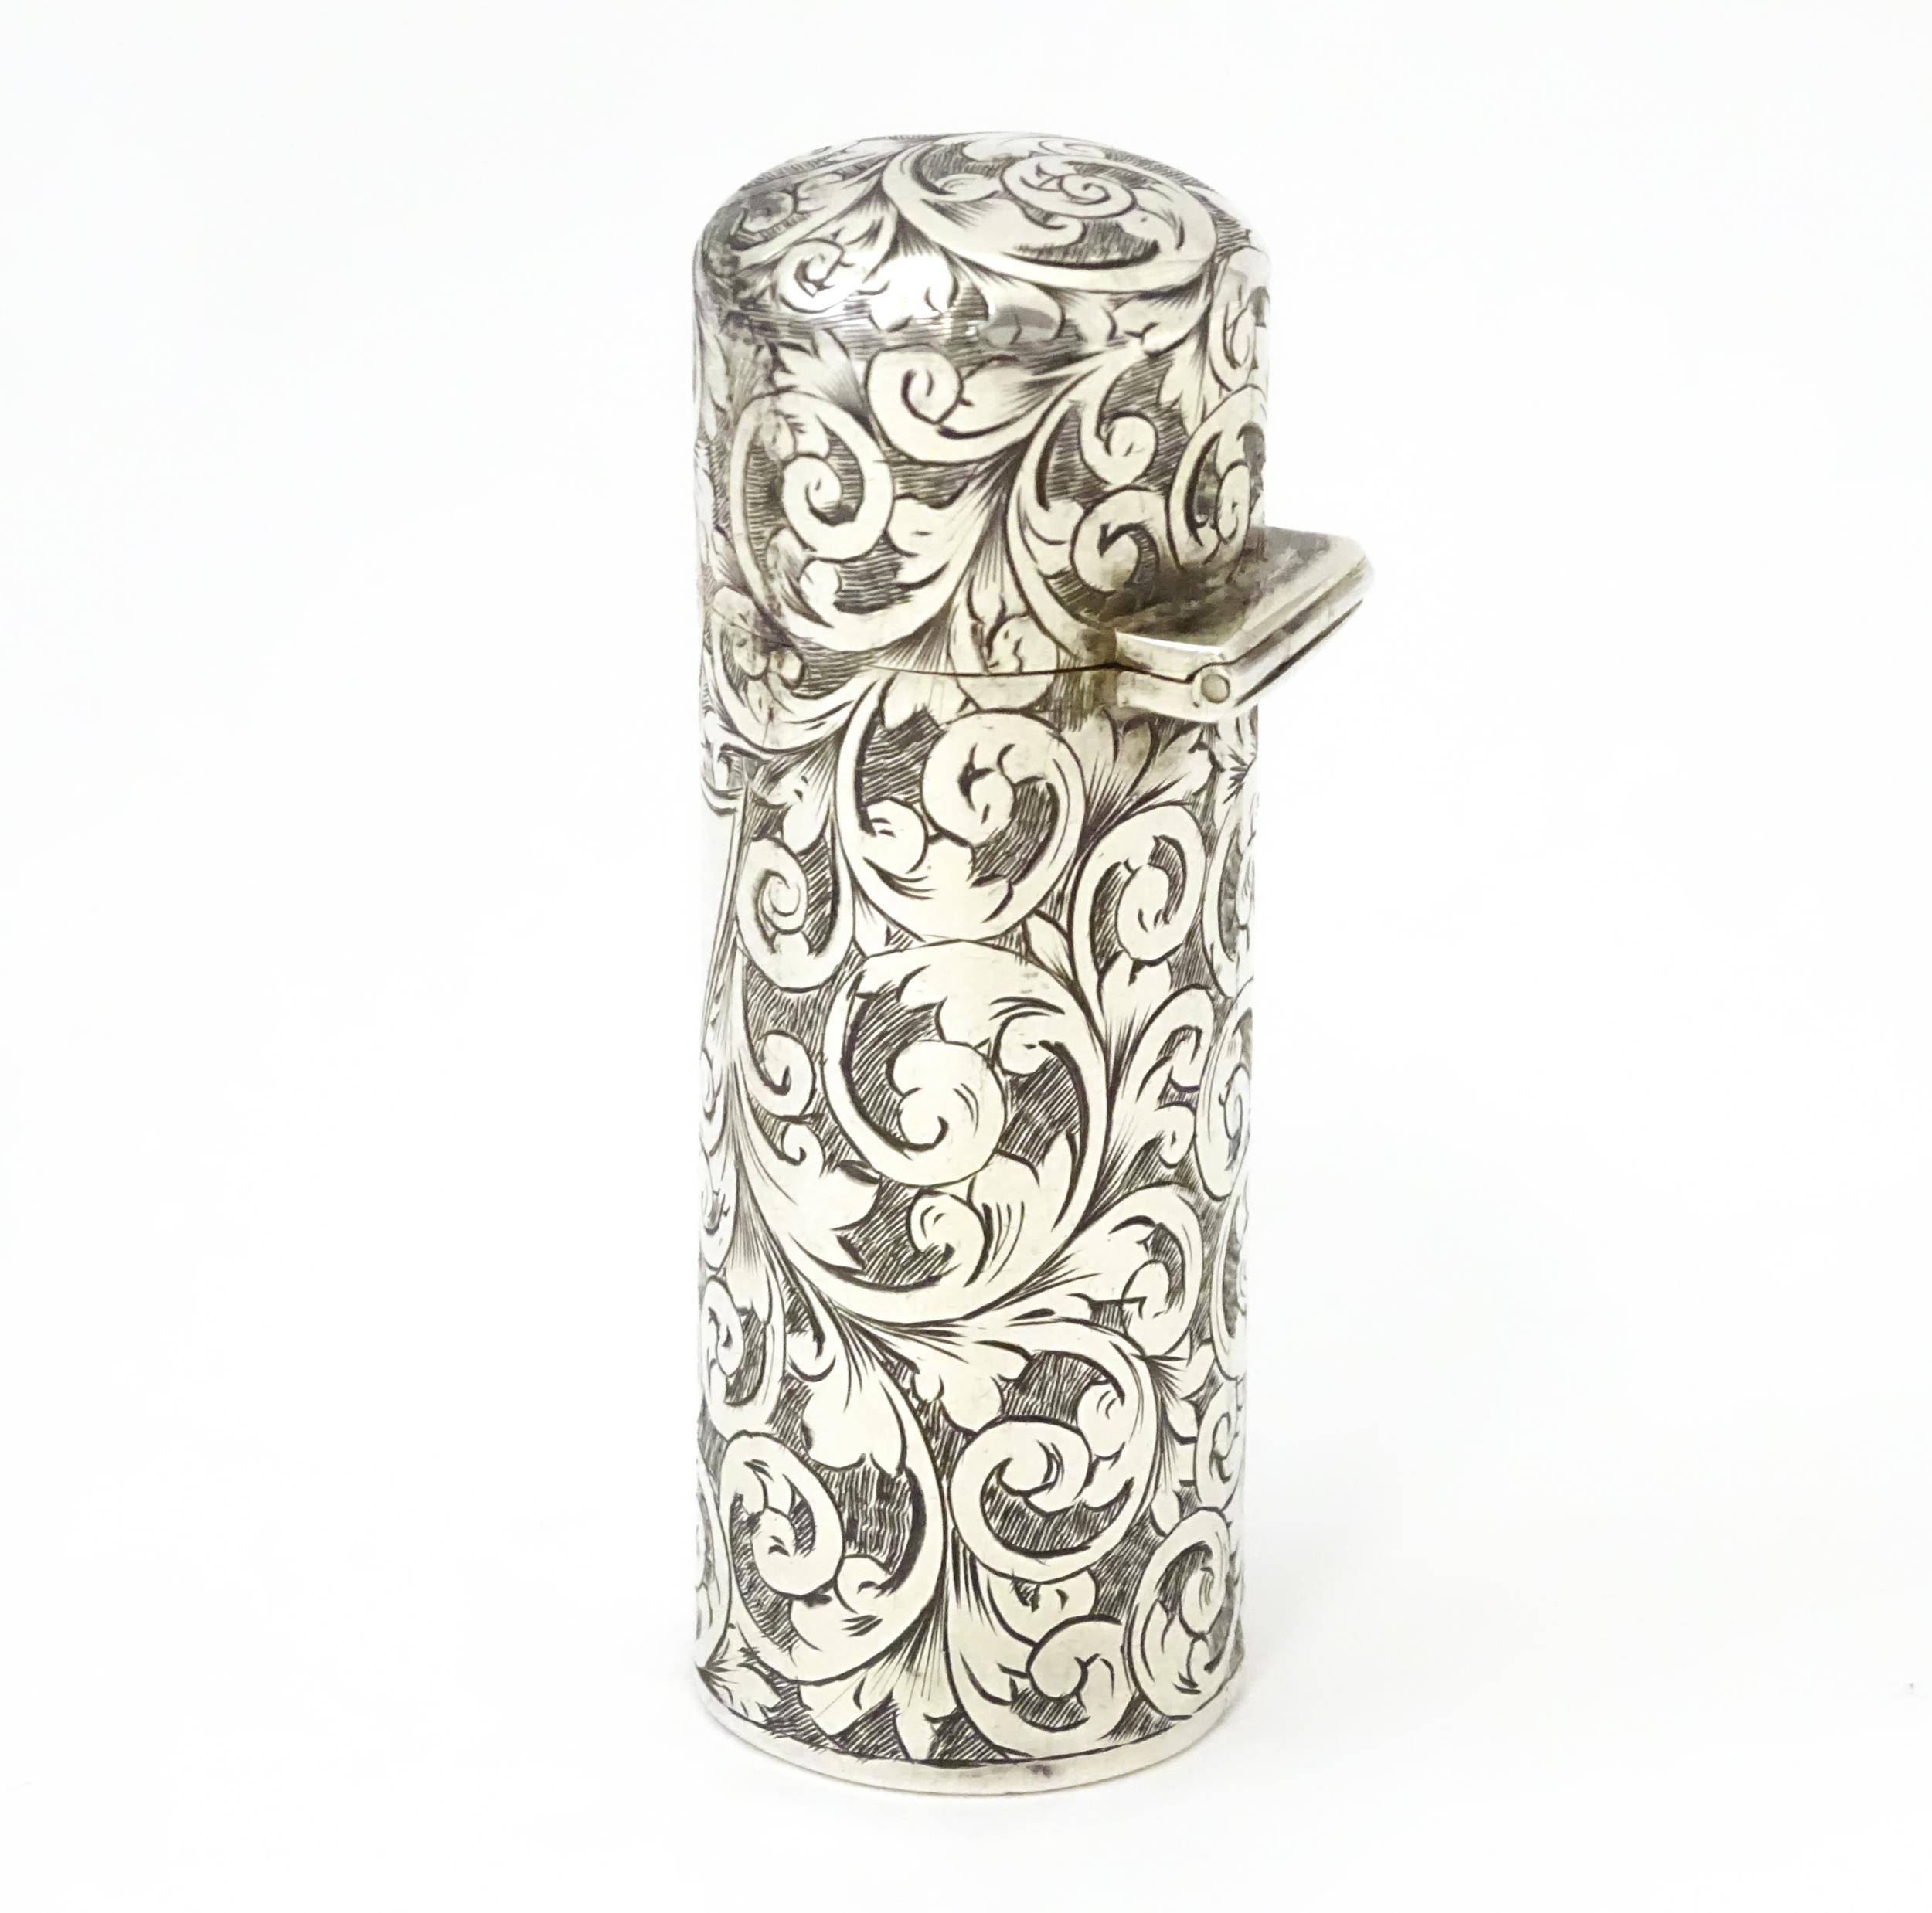 A silver scent / perfume bottle with engraved decoration opening to reveal gilded interior and - Image 4 of 9